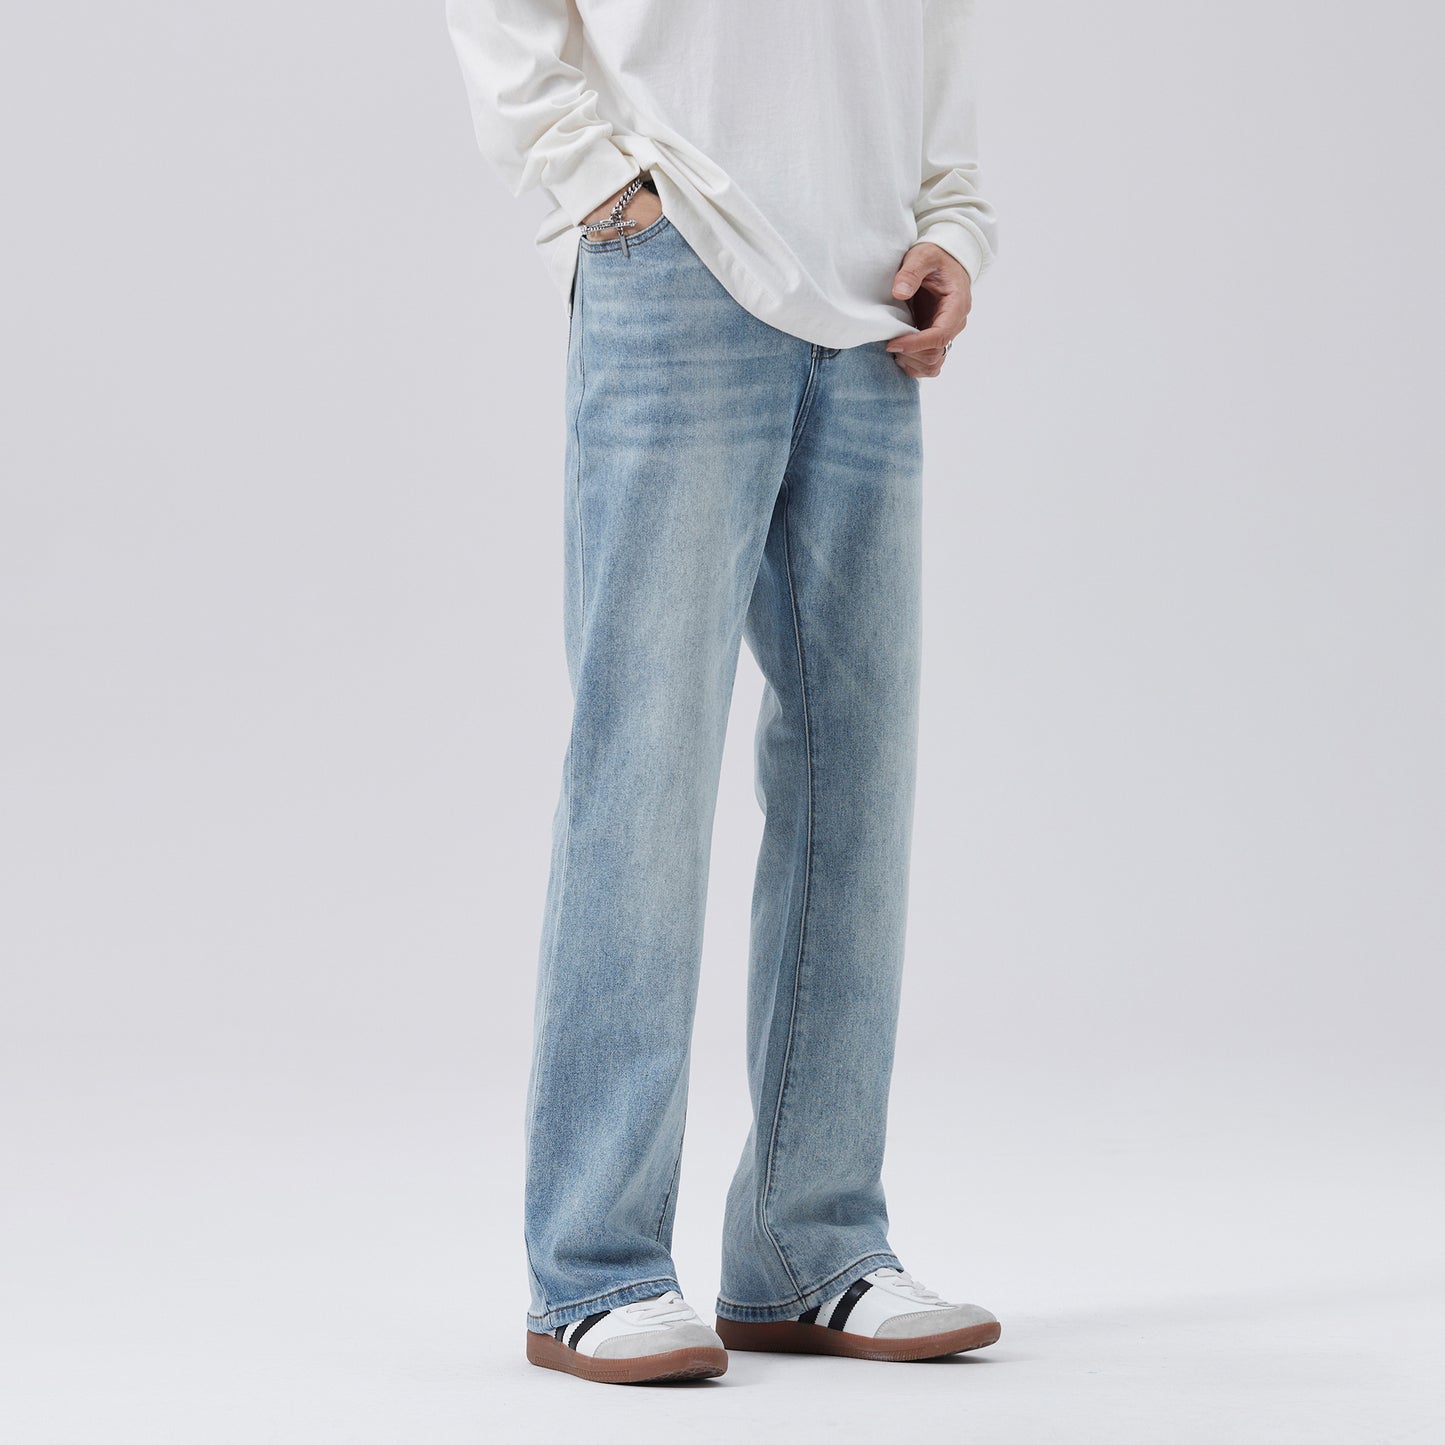 【23s September.】Simplicity Light-colored Jeans